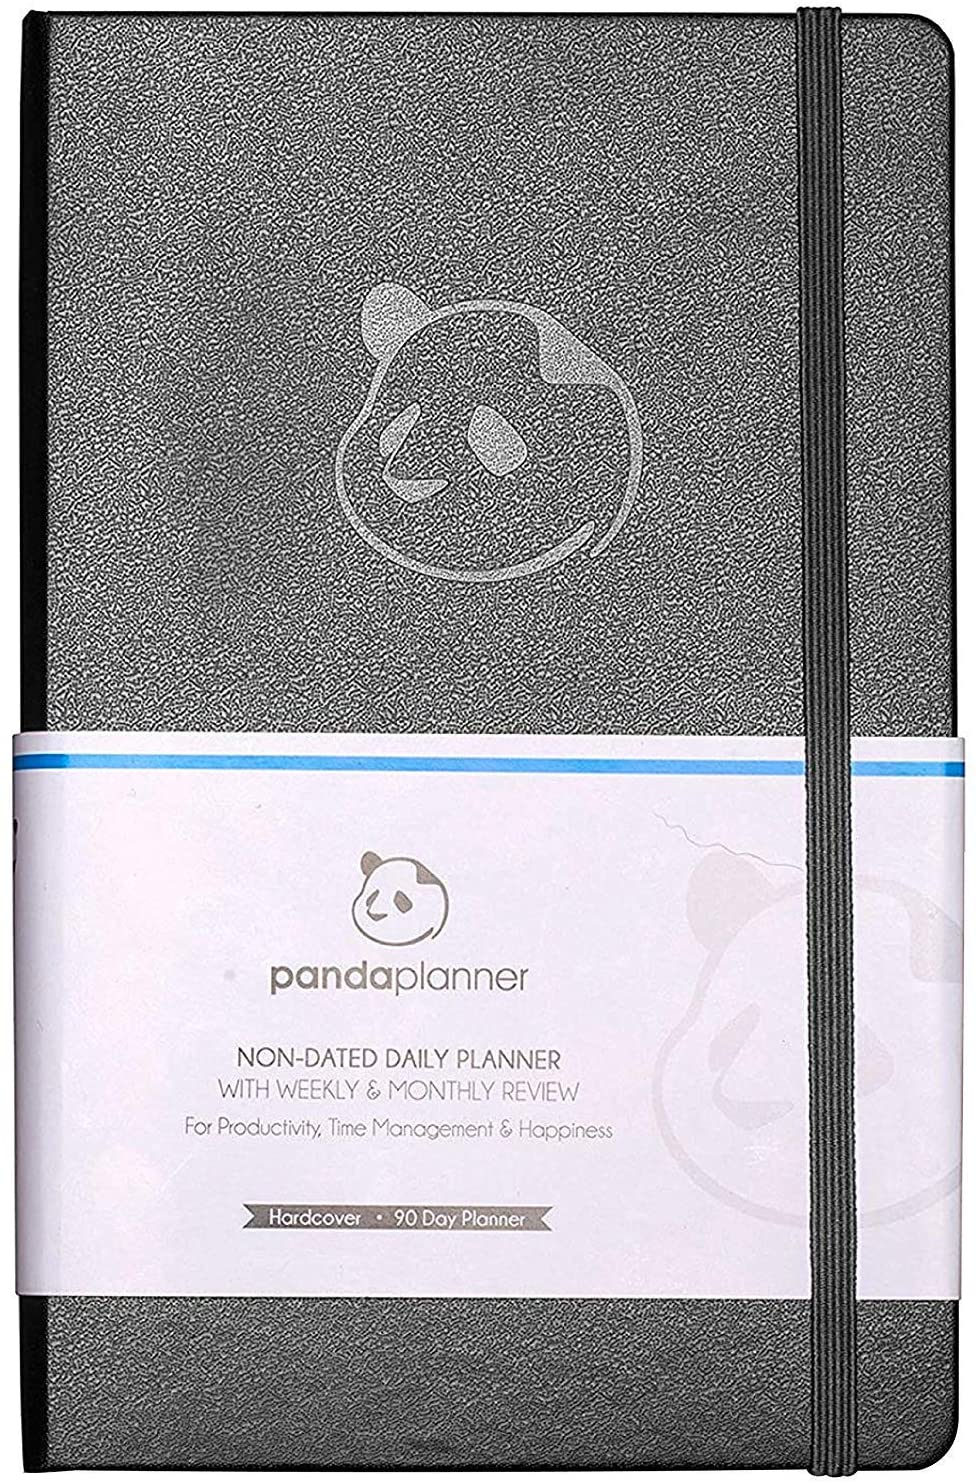 Daily Planner 2020 by Panda Planner